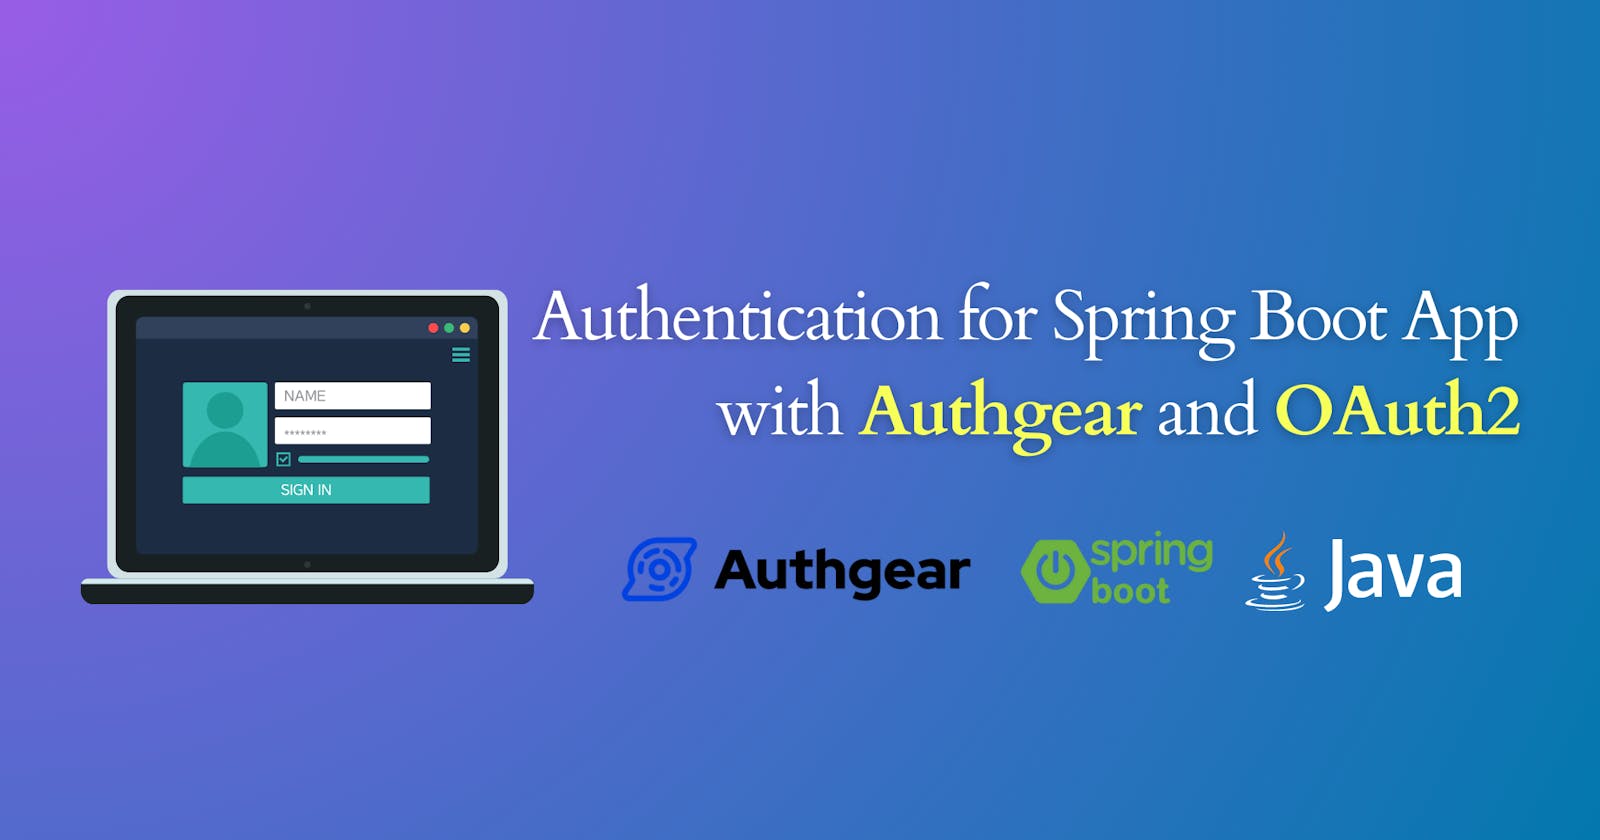 Authentication for Spring Boot App with Authgear and OAuth2